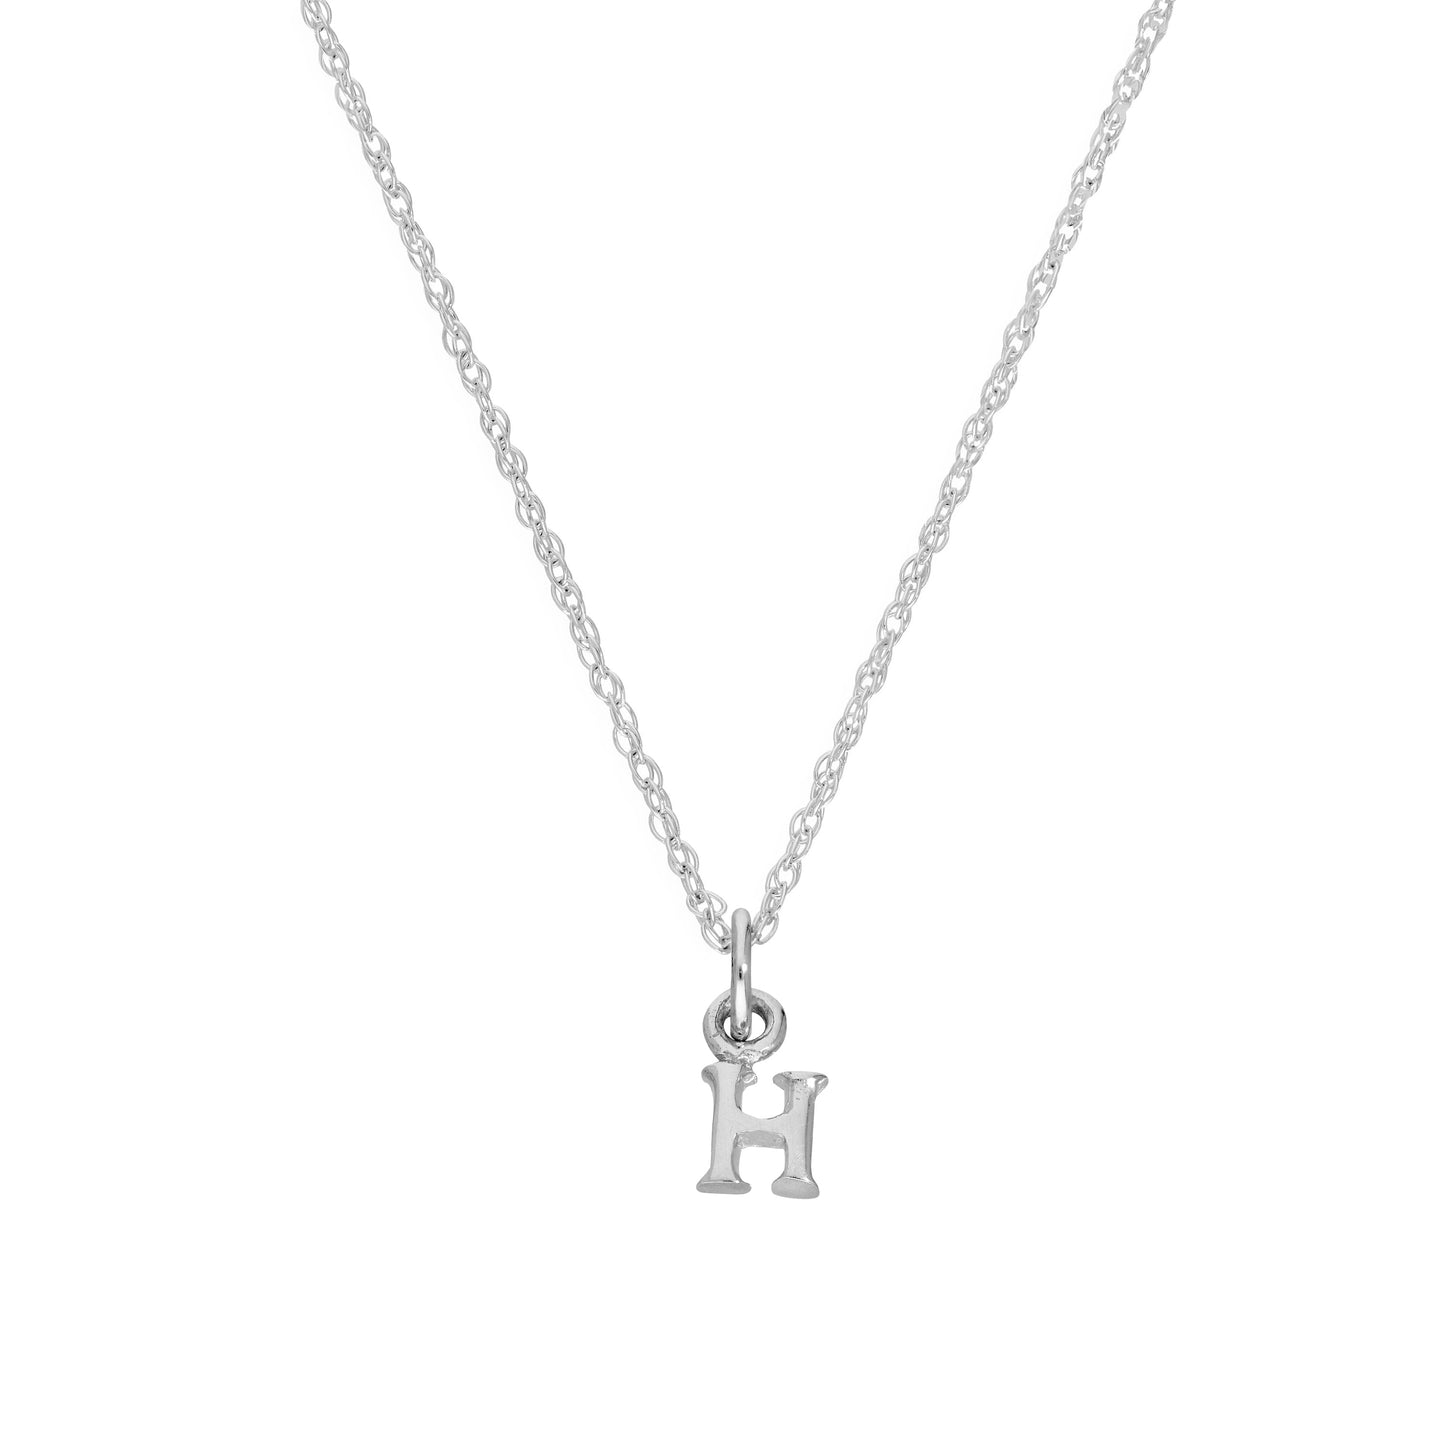 Tiny Sterling Silver Alphabet Letter H Pendant Necklace 14 - 22 Inches